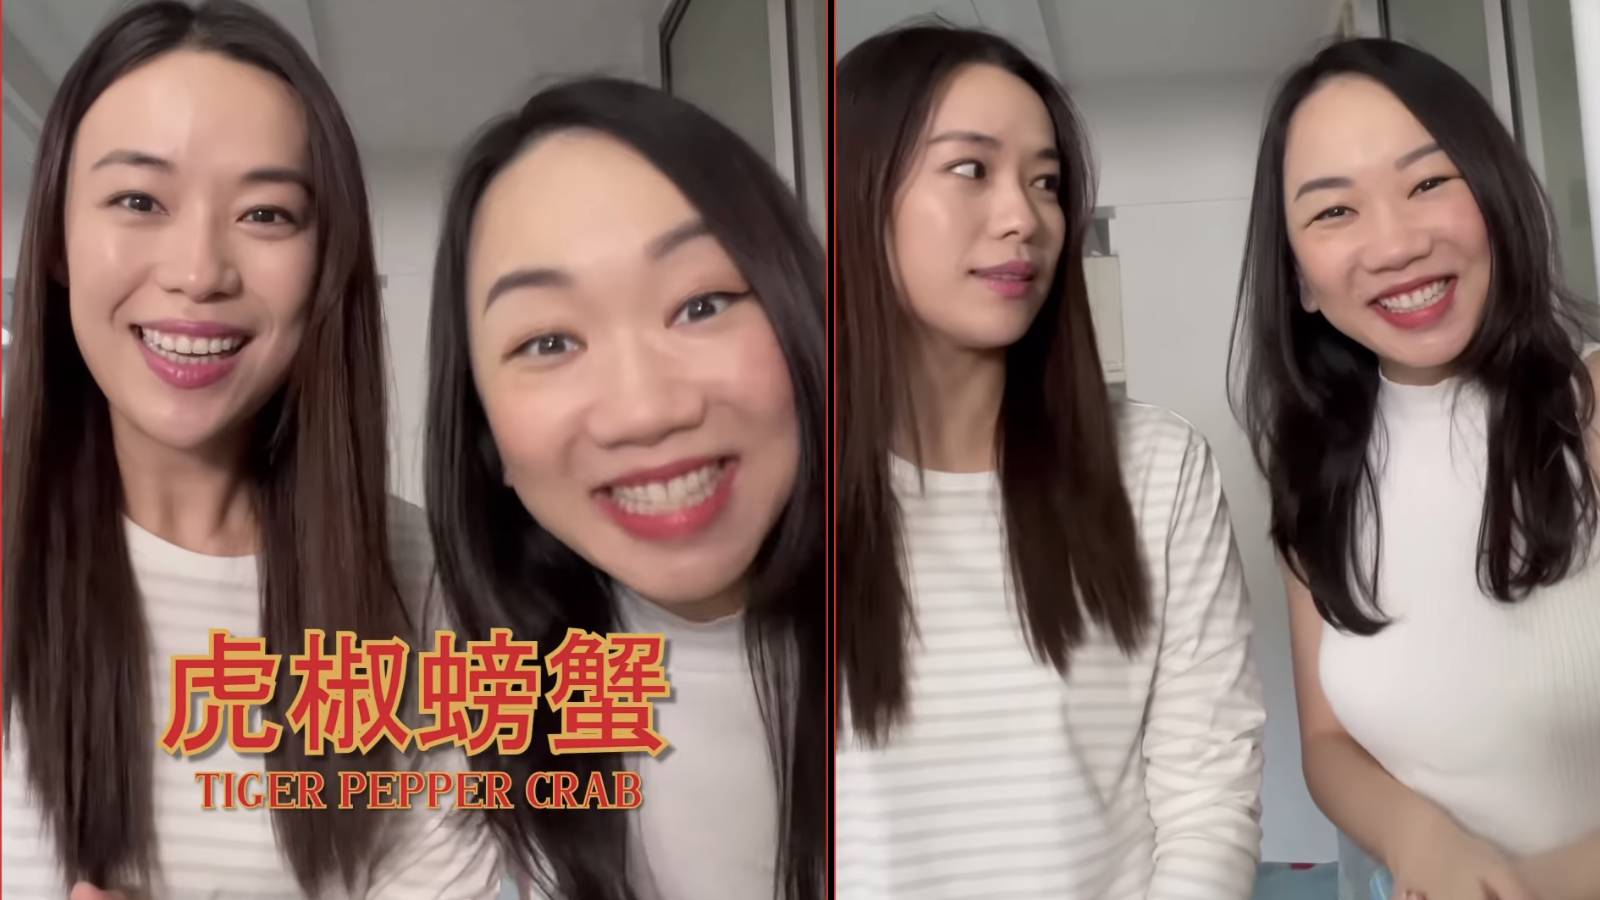 Chiou Huey 'horrified' Rebecca Lim with her interesting repertoire of tiger-related phrases